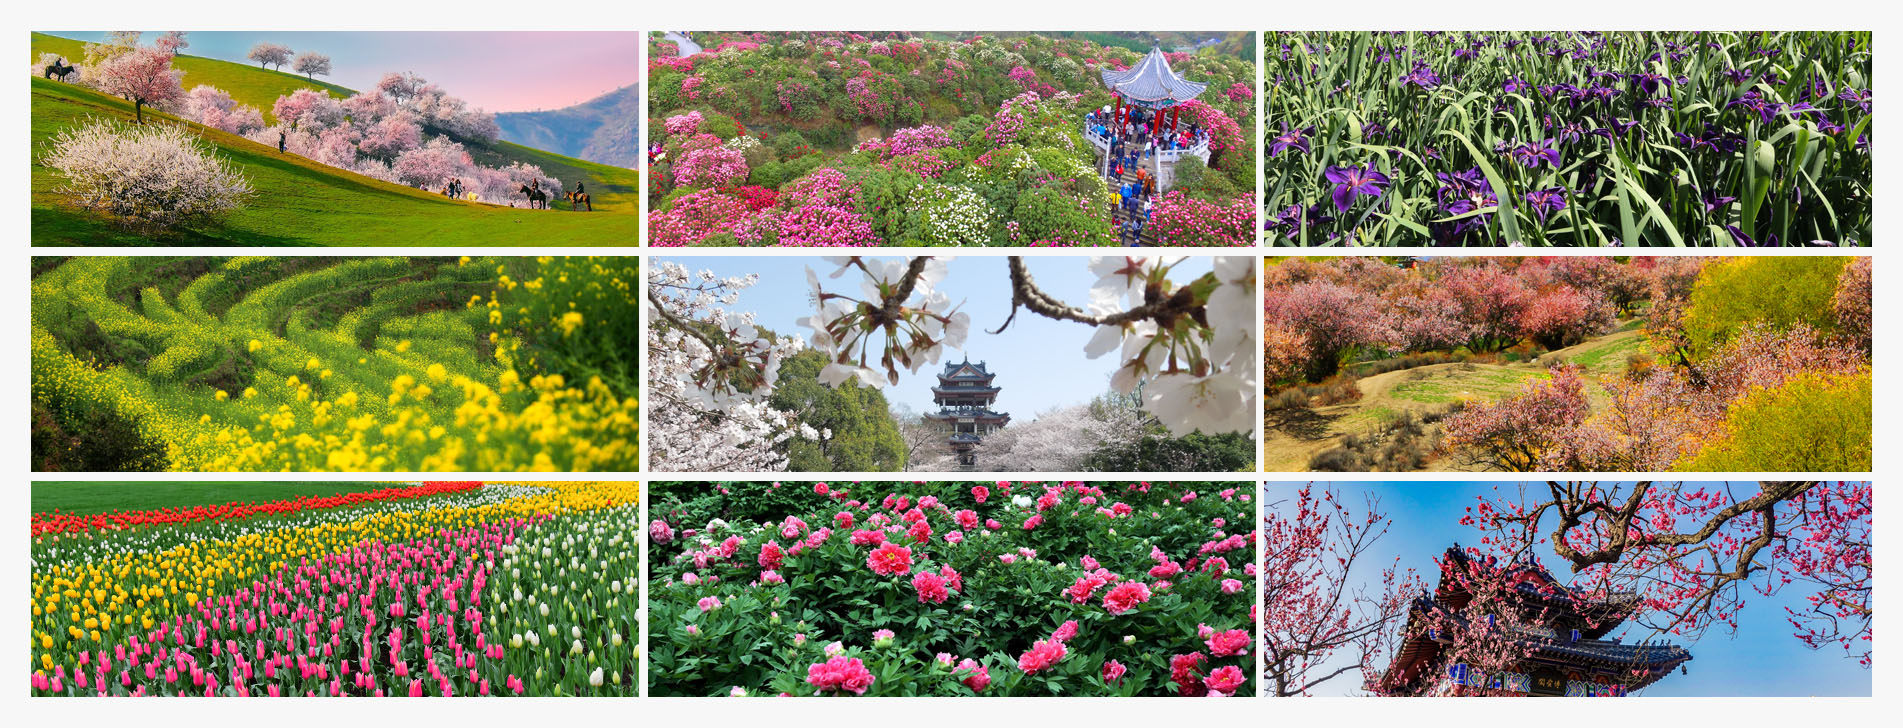 Spring delight: 9 recommended destinations to see blossom in China